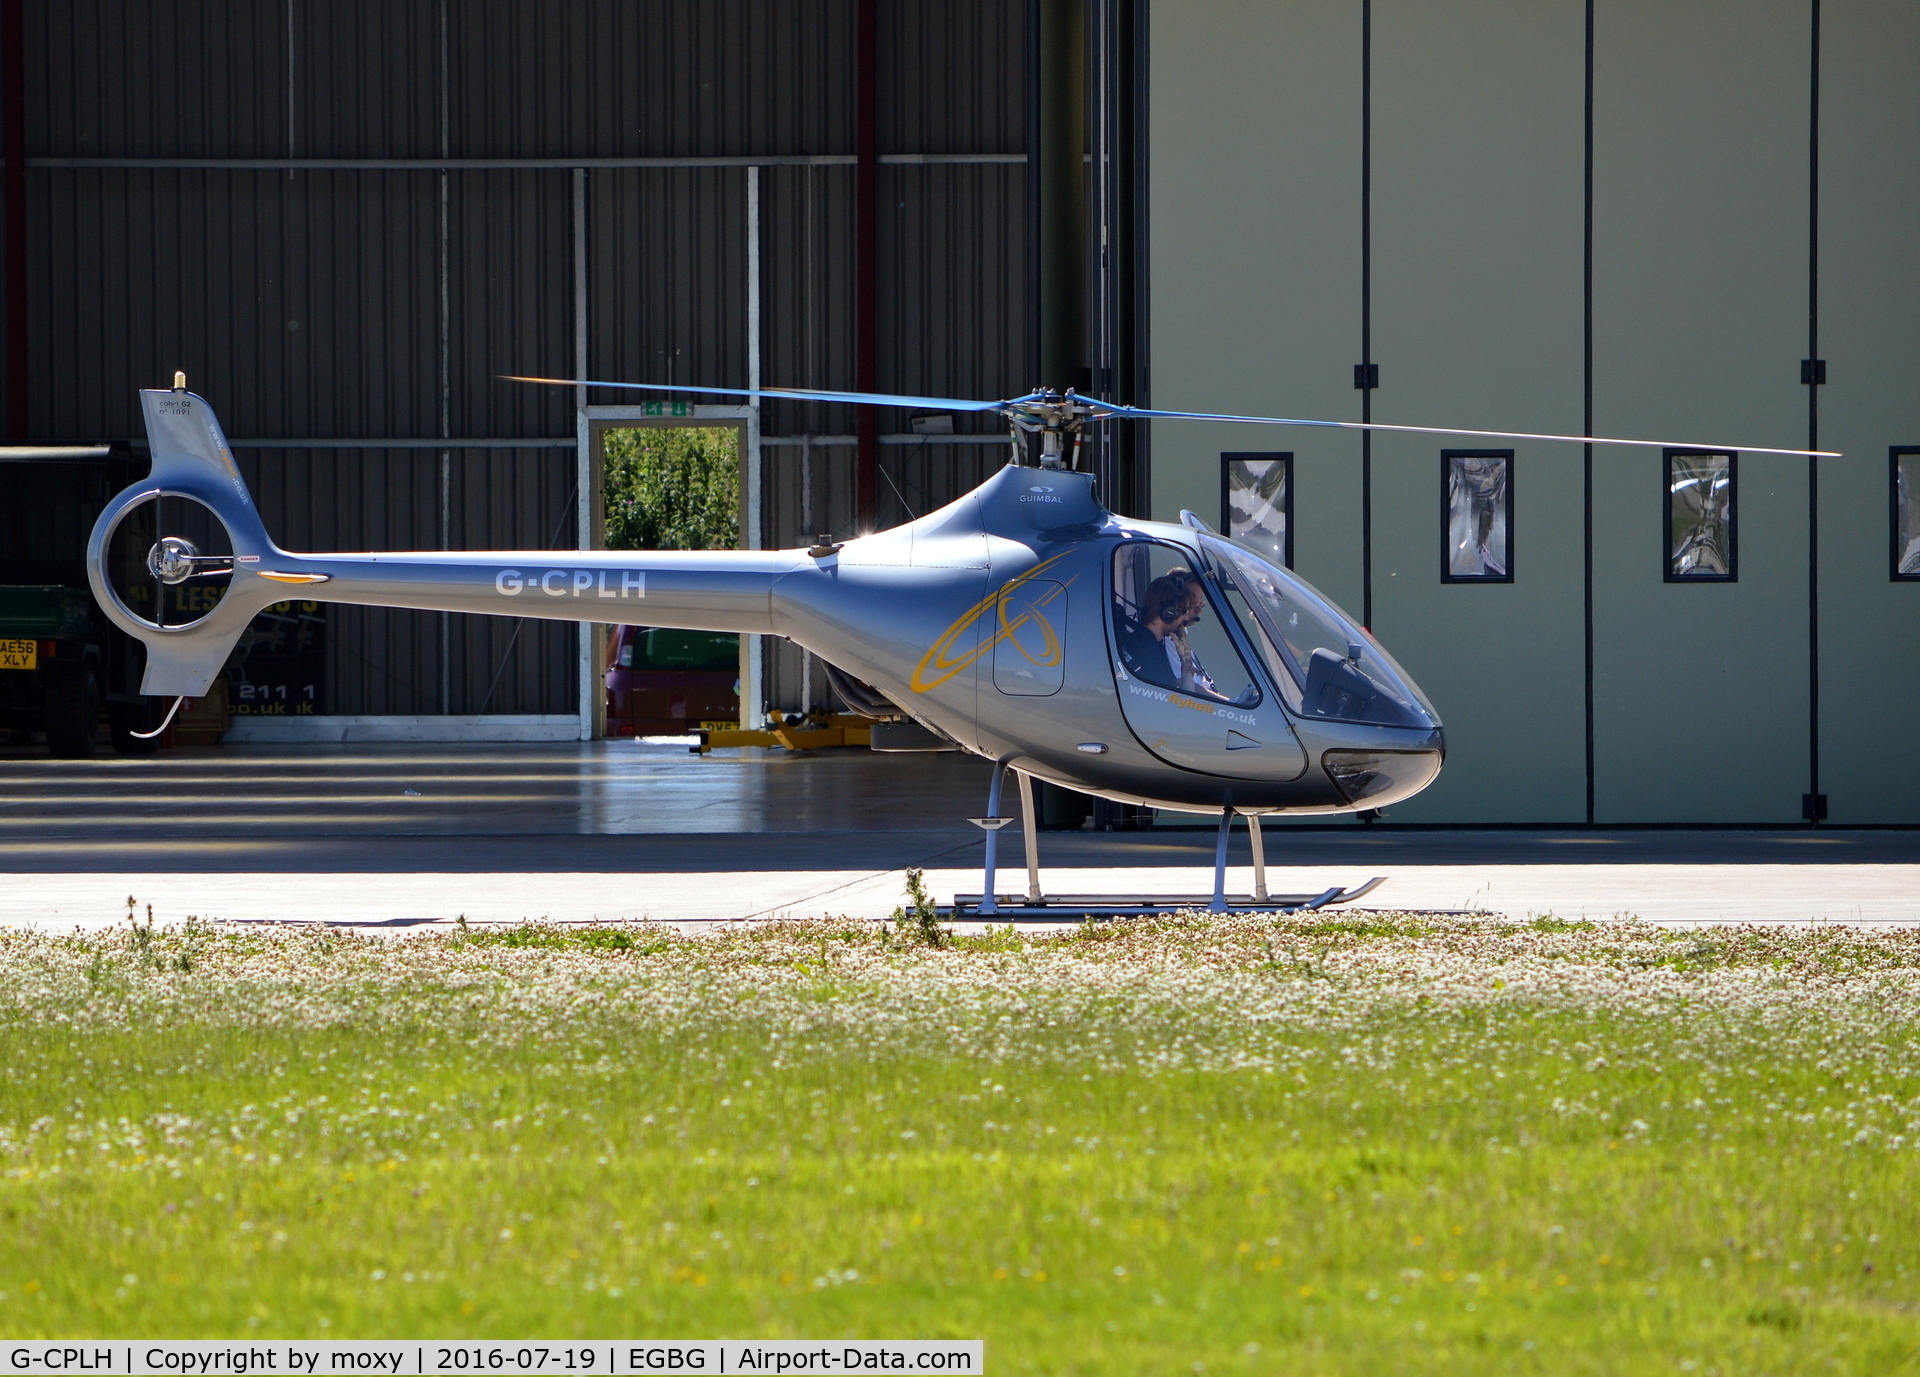 G-CPLH, 2015 Guimbal Cabri G2CA C/N 1091, Guimbal Cabri G2 at Leicester Airport.